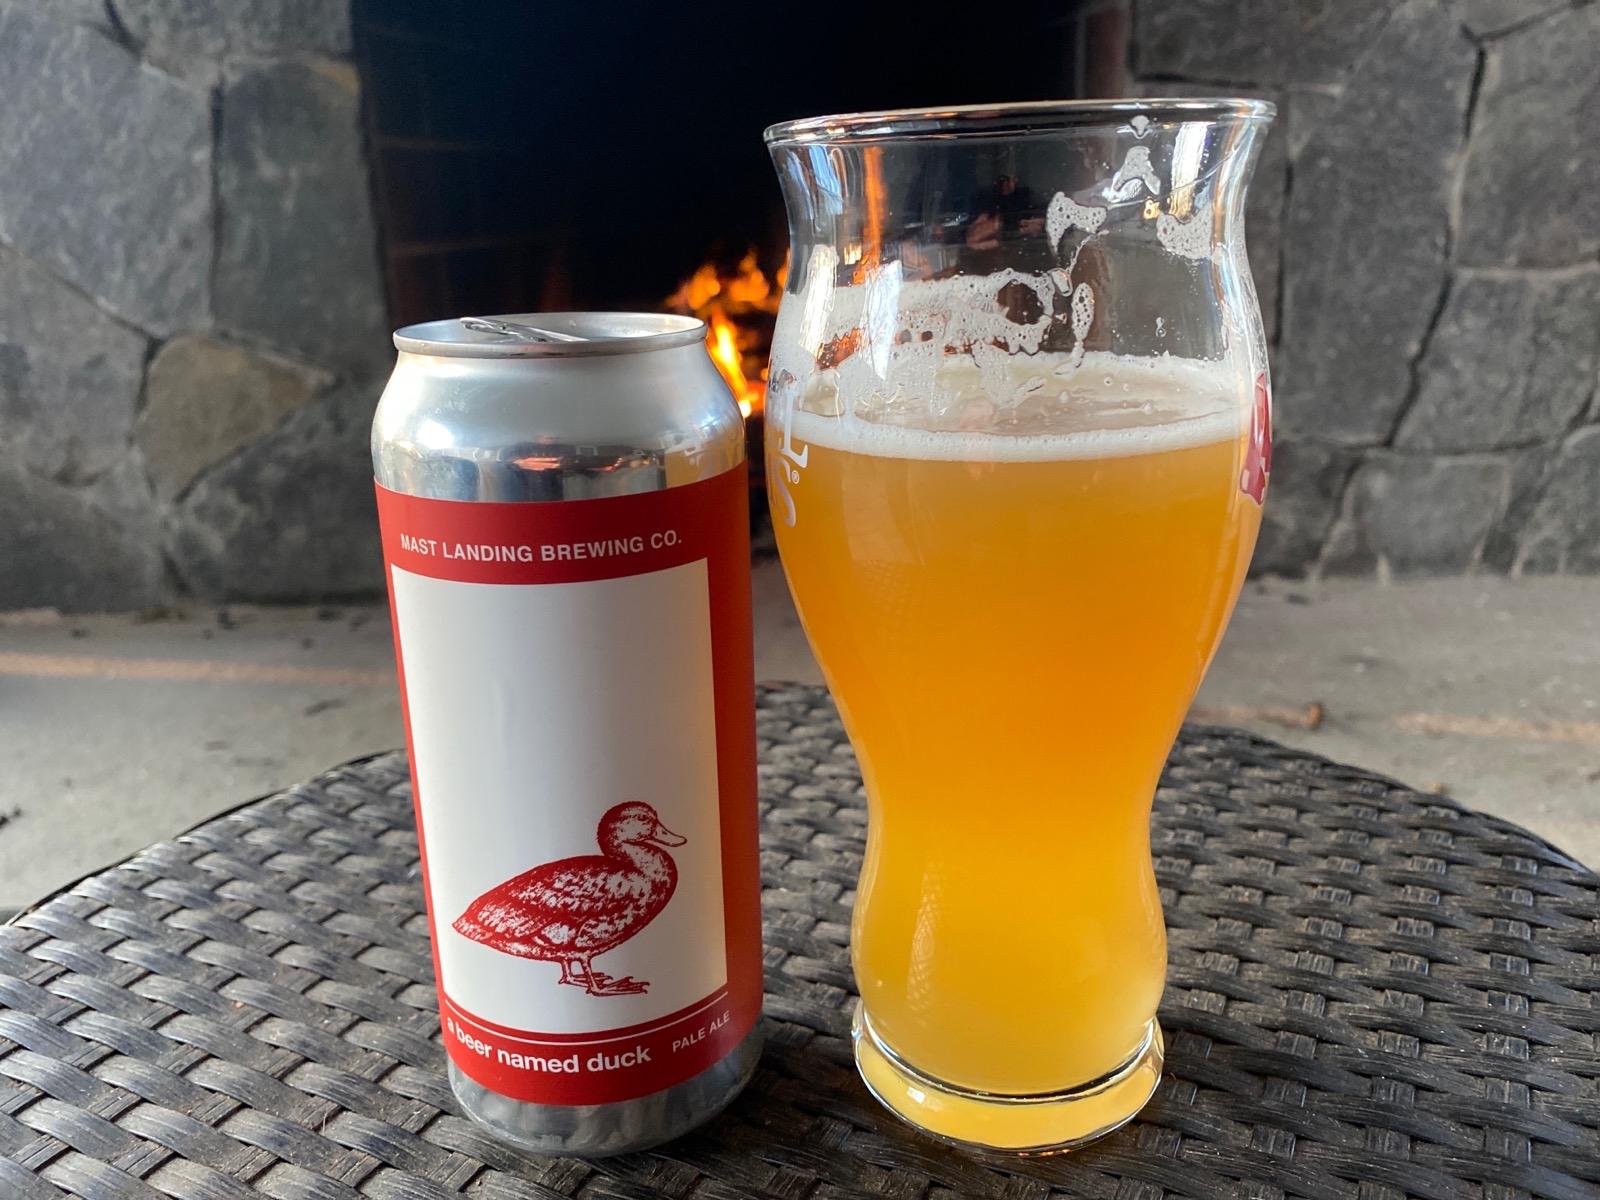 A Beer Named Duck